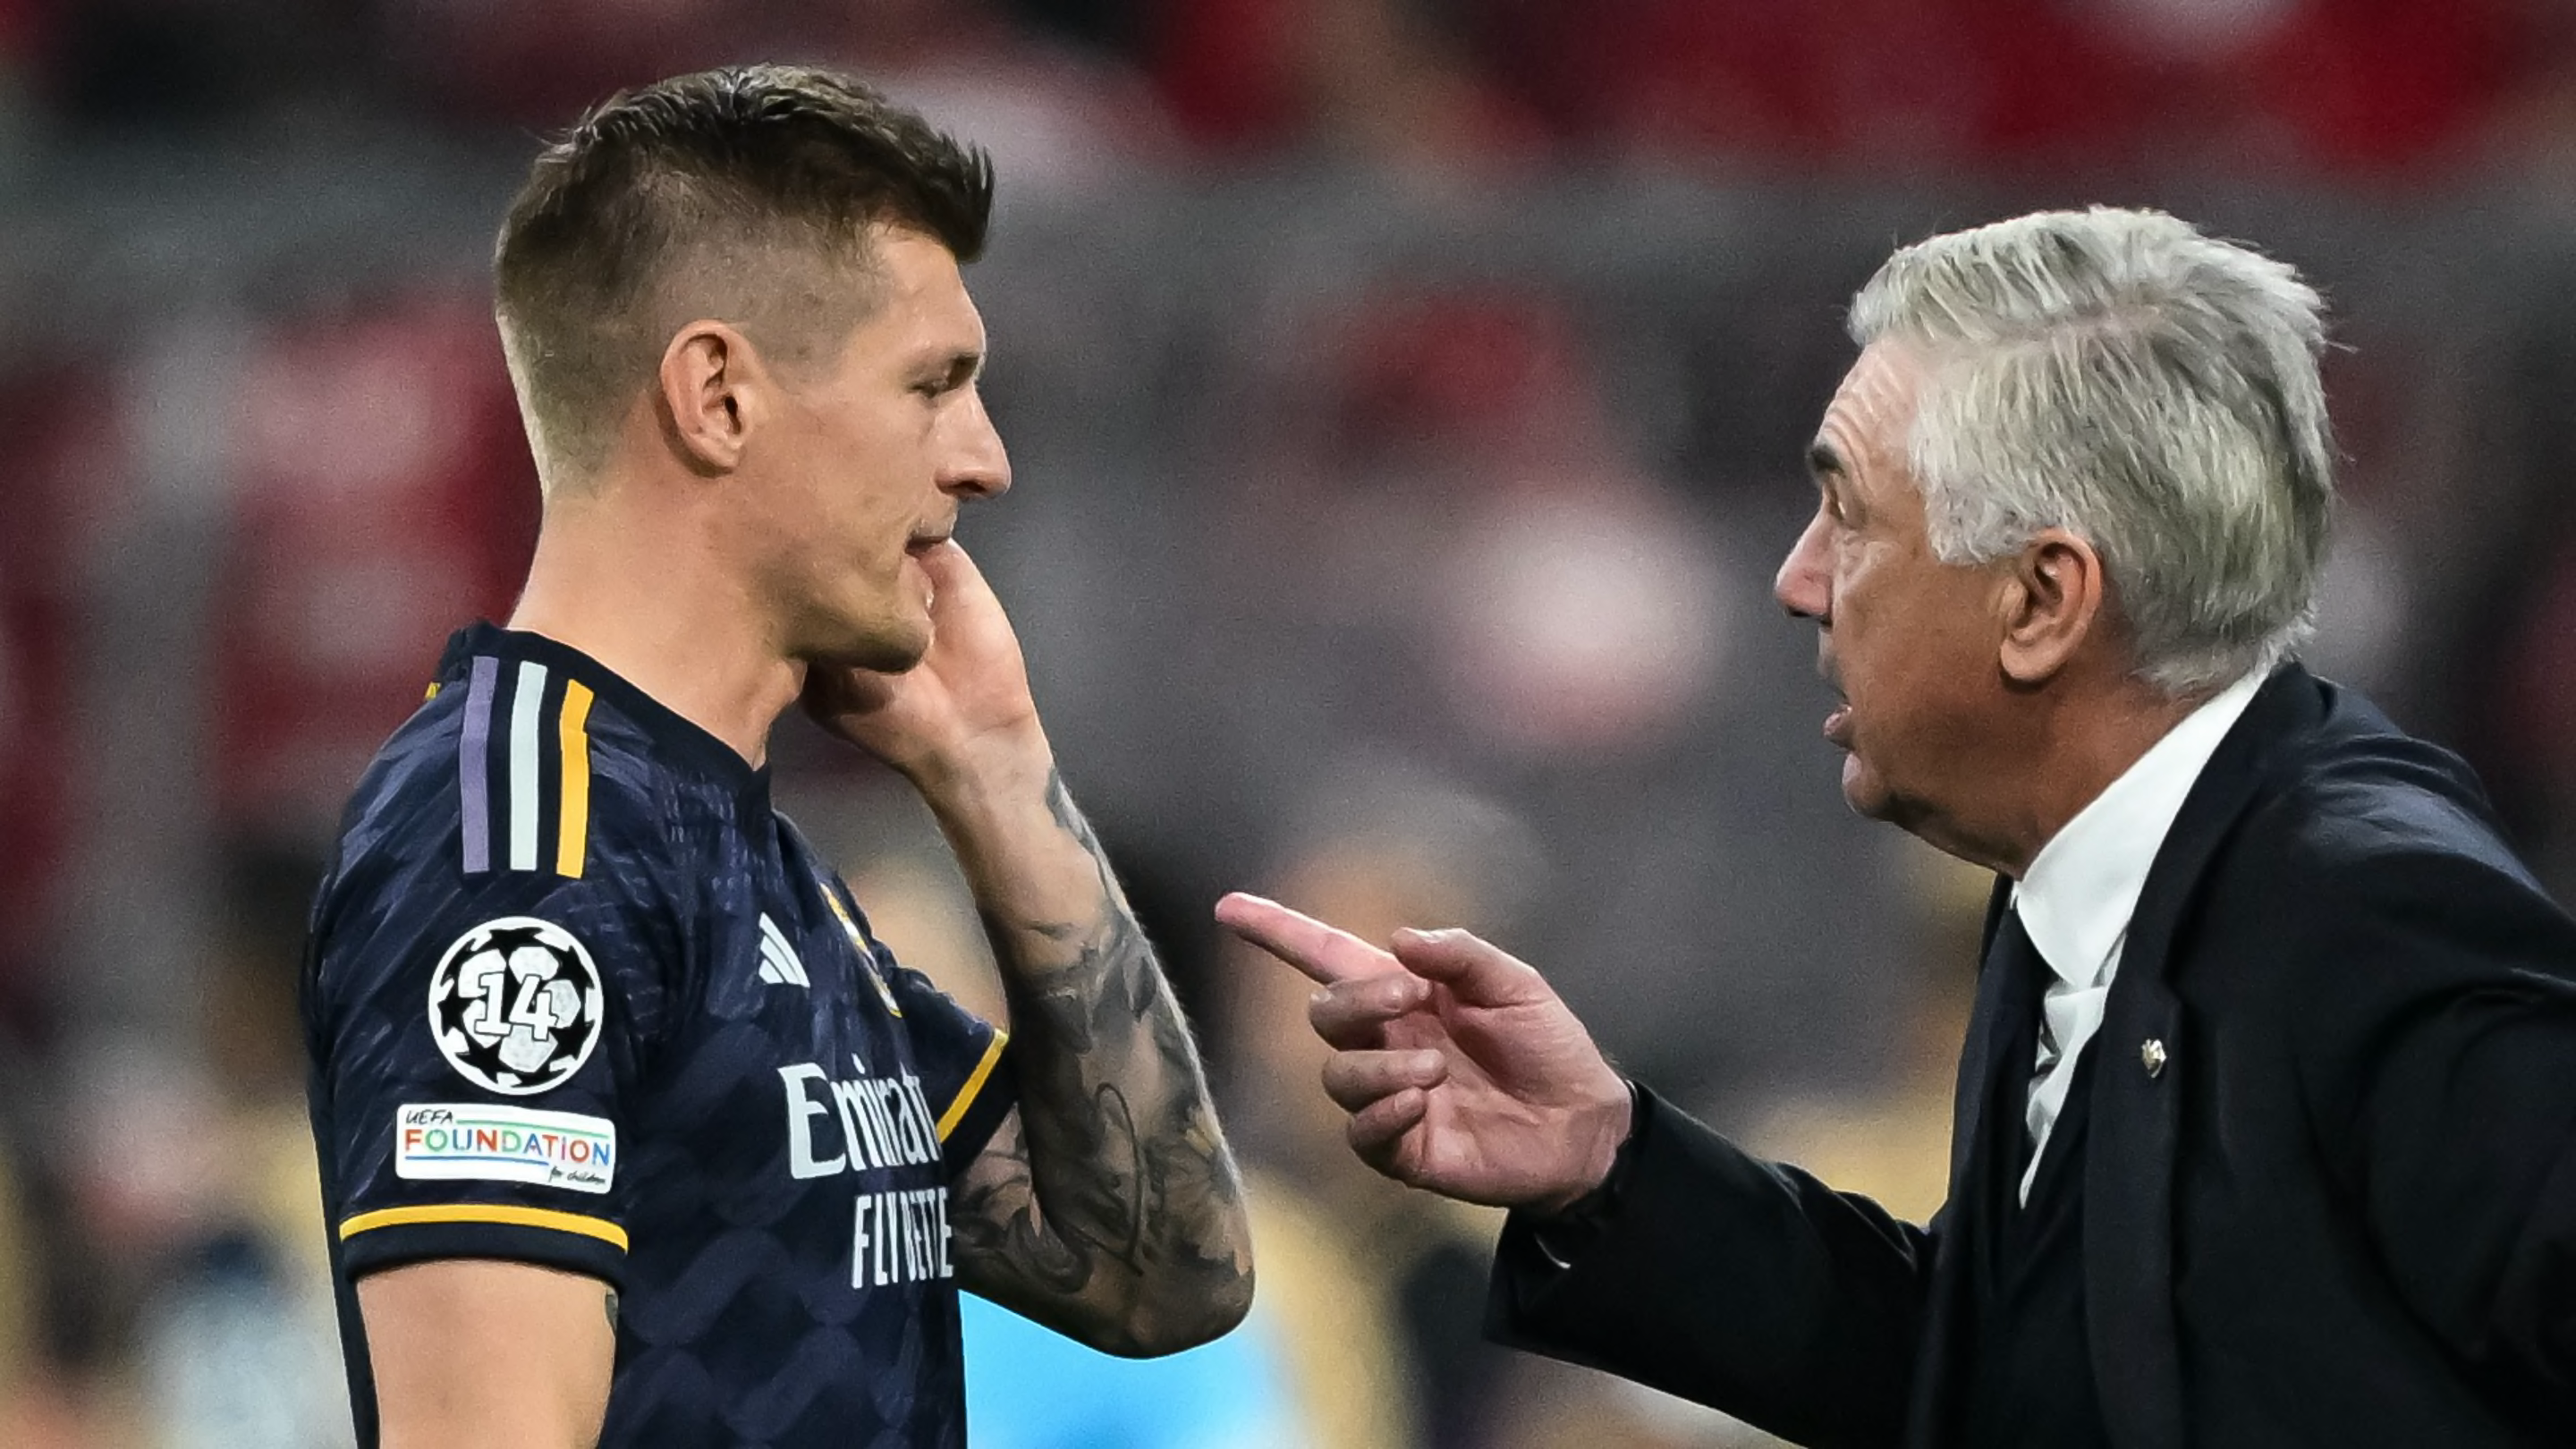 Carlo Ancelotti reveals how Toni Kroos showed 'courage' to announce retirement